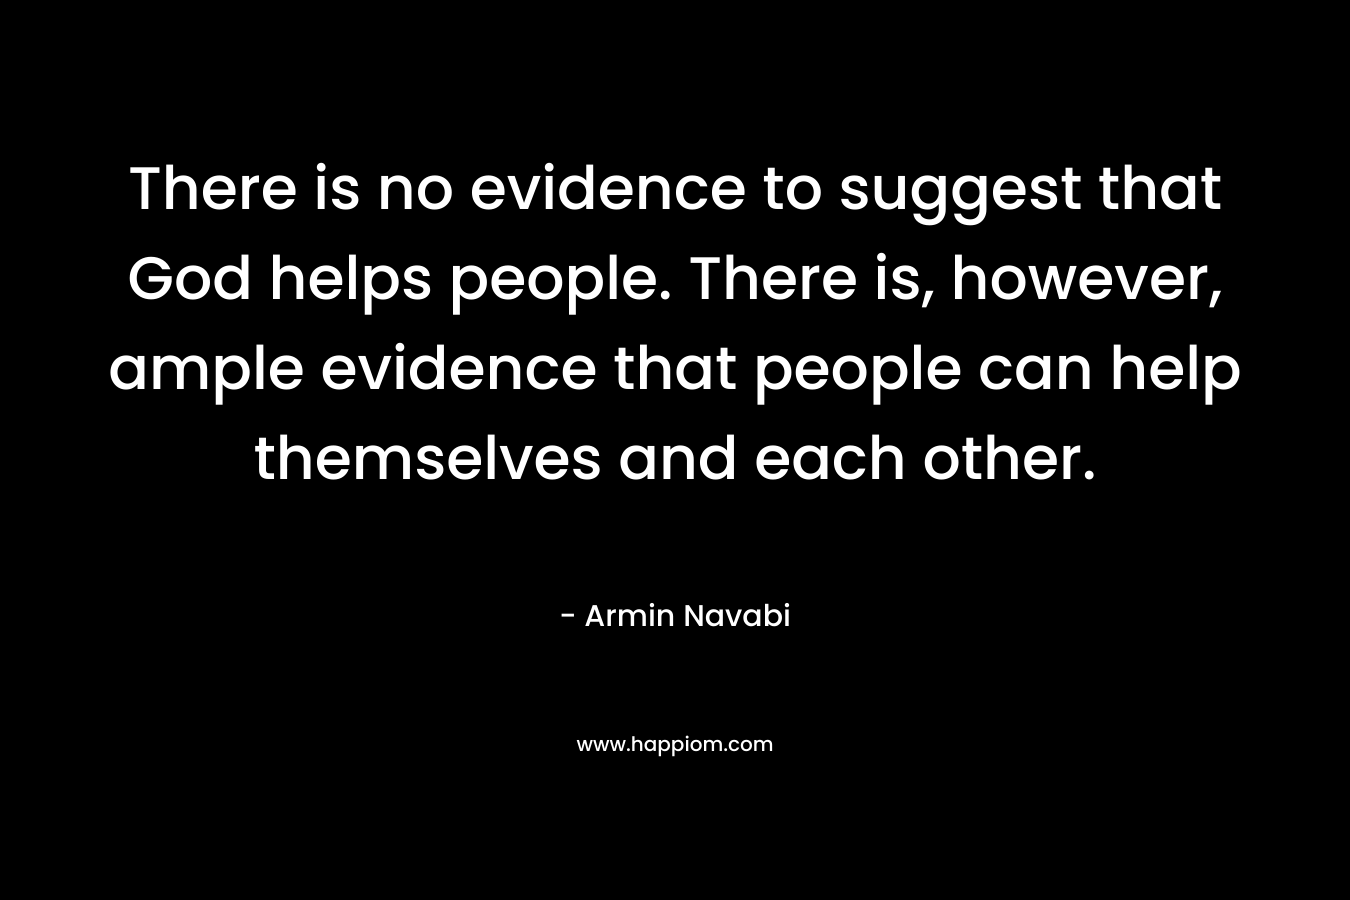 There is no evidence to suggest that God helps people. There is, however, ample evidence that people can help themselves and each other.